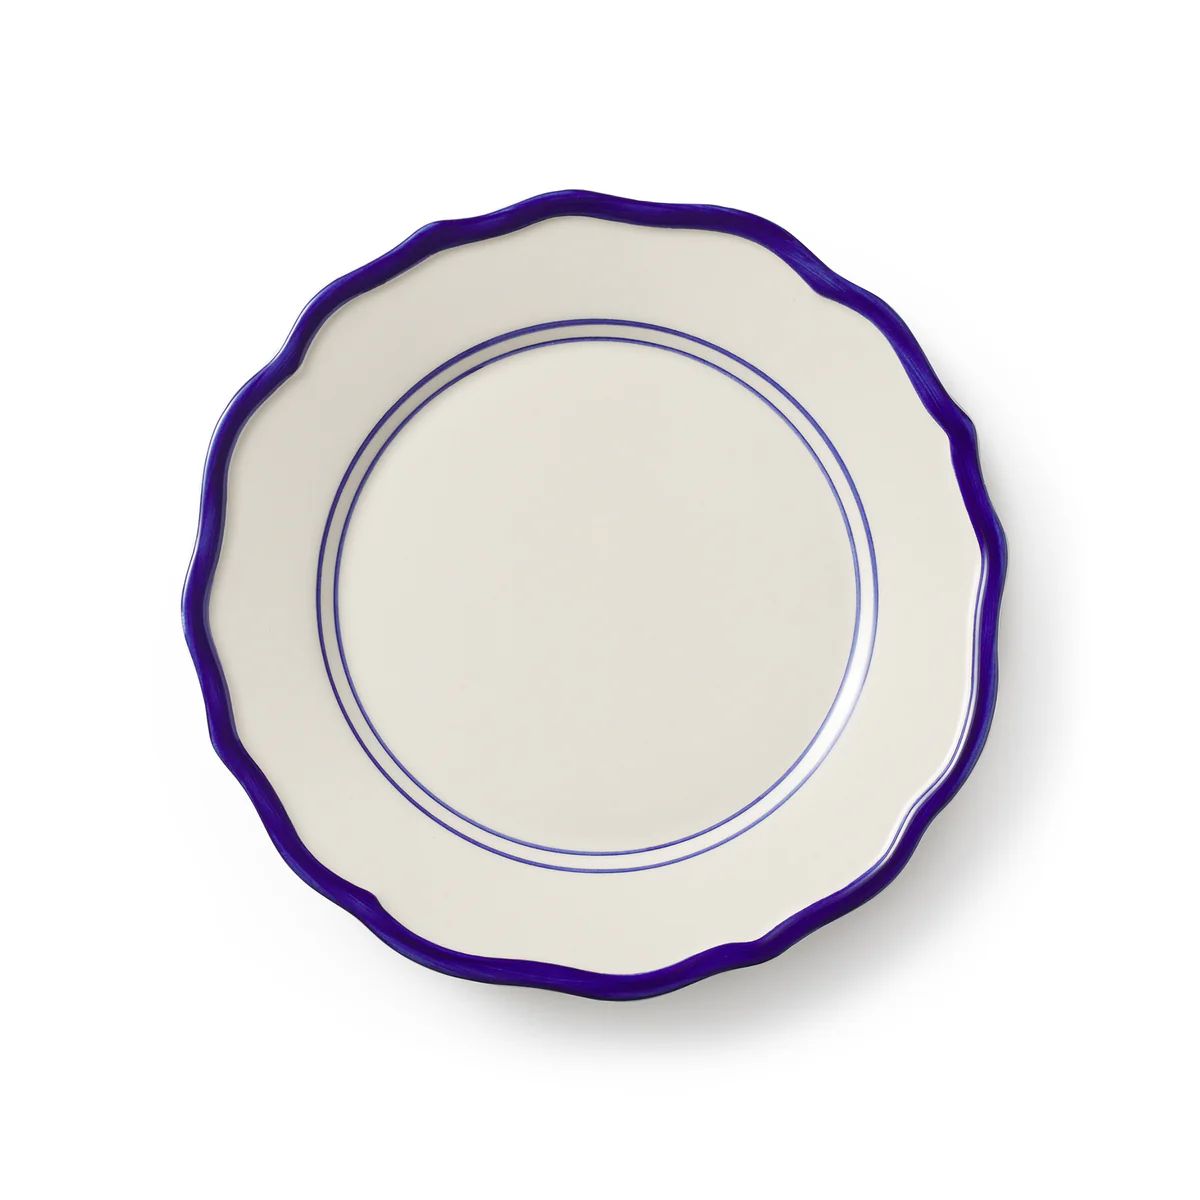 Jane Side Plate, Set of 4 | Over The Moon